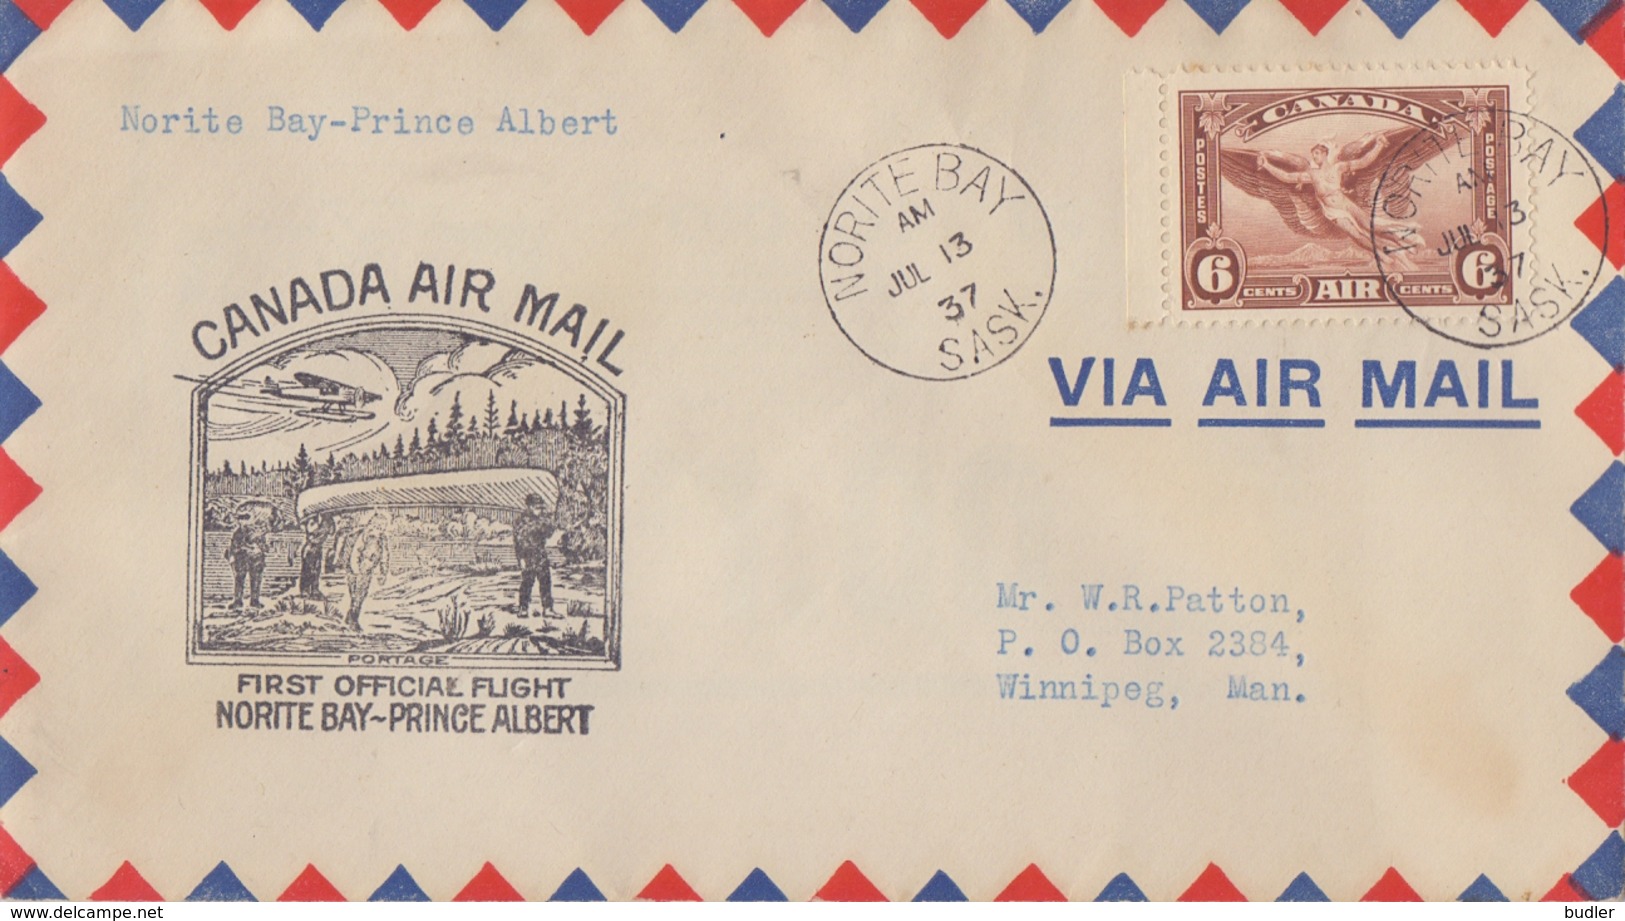 CANADA:1937:Travelled First Official Flight From NORITE BAY To PRINCE ALBERT: NAVIGATION,ROWING,AVIATION,AIR MAIL,ICARUS - Premiers Vols